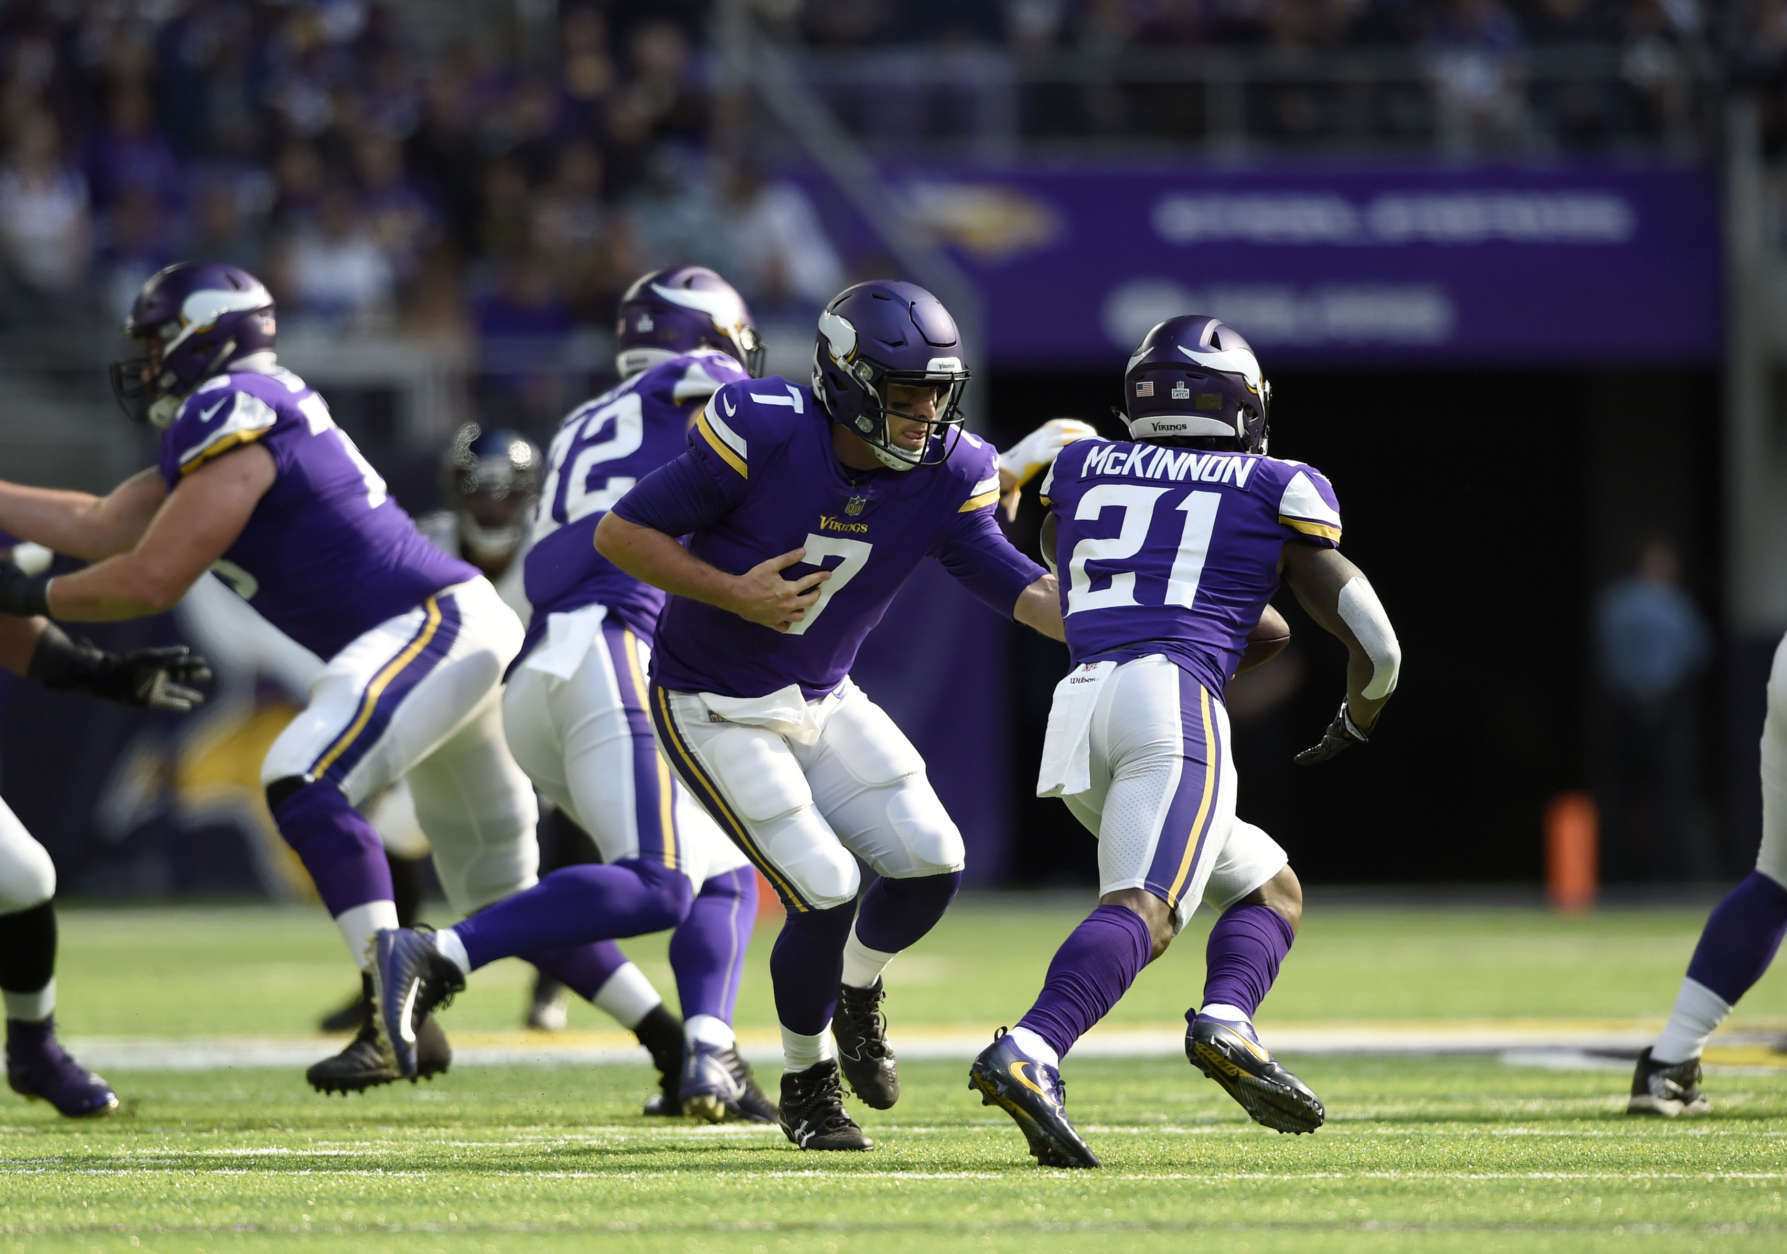 MINNEAPOLIS, MN - OCTOBER 22: Case Keenum #7 of the Minnesota Vikings hands the ball off to Jerick McKinnon #21 in the first half of the game agains the Baltimore Ravens on October 22, 2017 at U.S. Bank Stadium in Minneapolis, Minnesota. (Photo by Hannah Foslien/Getty Images)